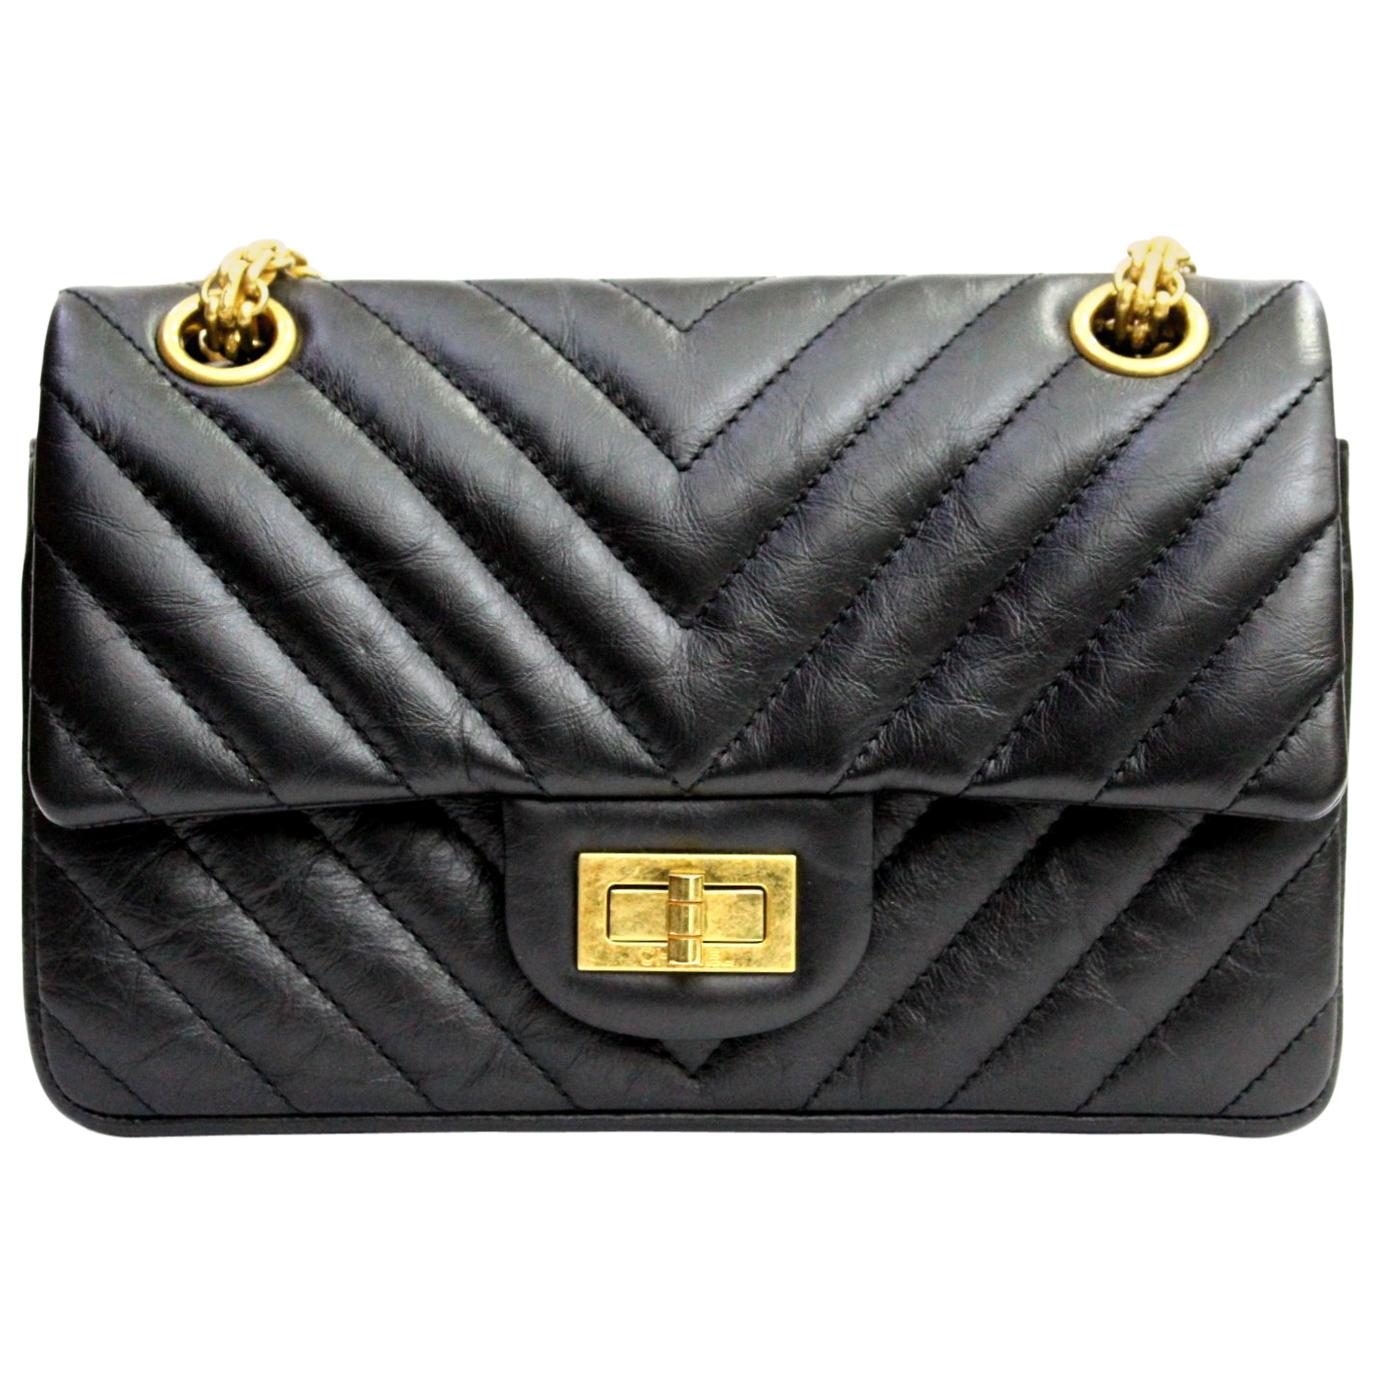 Chanel Black Leather Classic 2.55 Small Size Bag